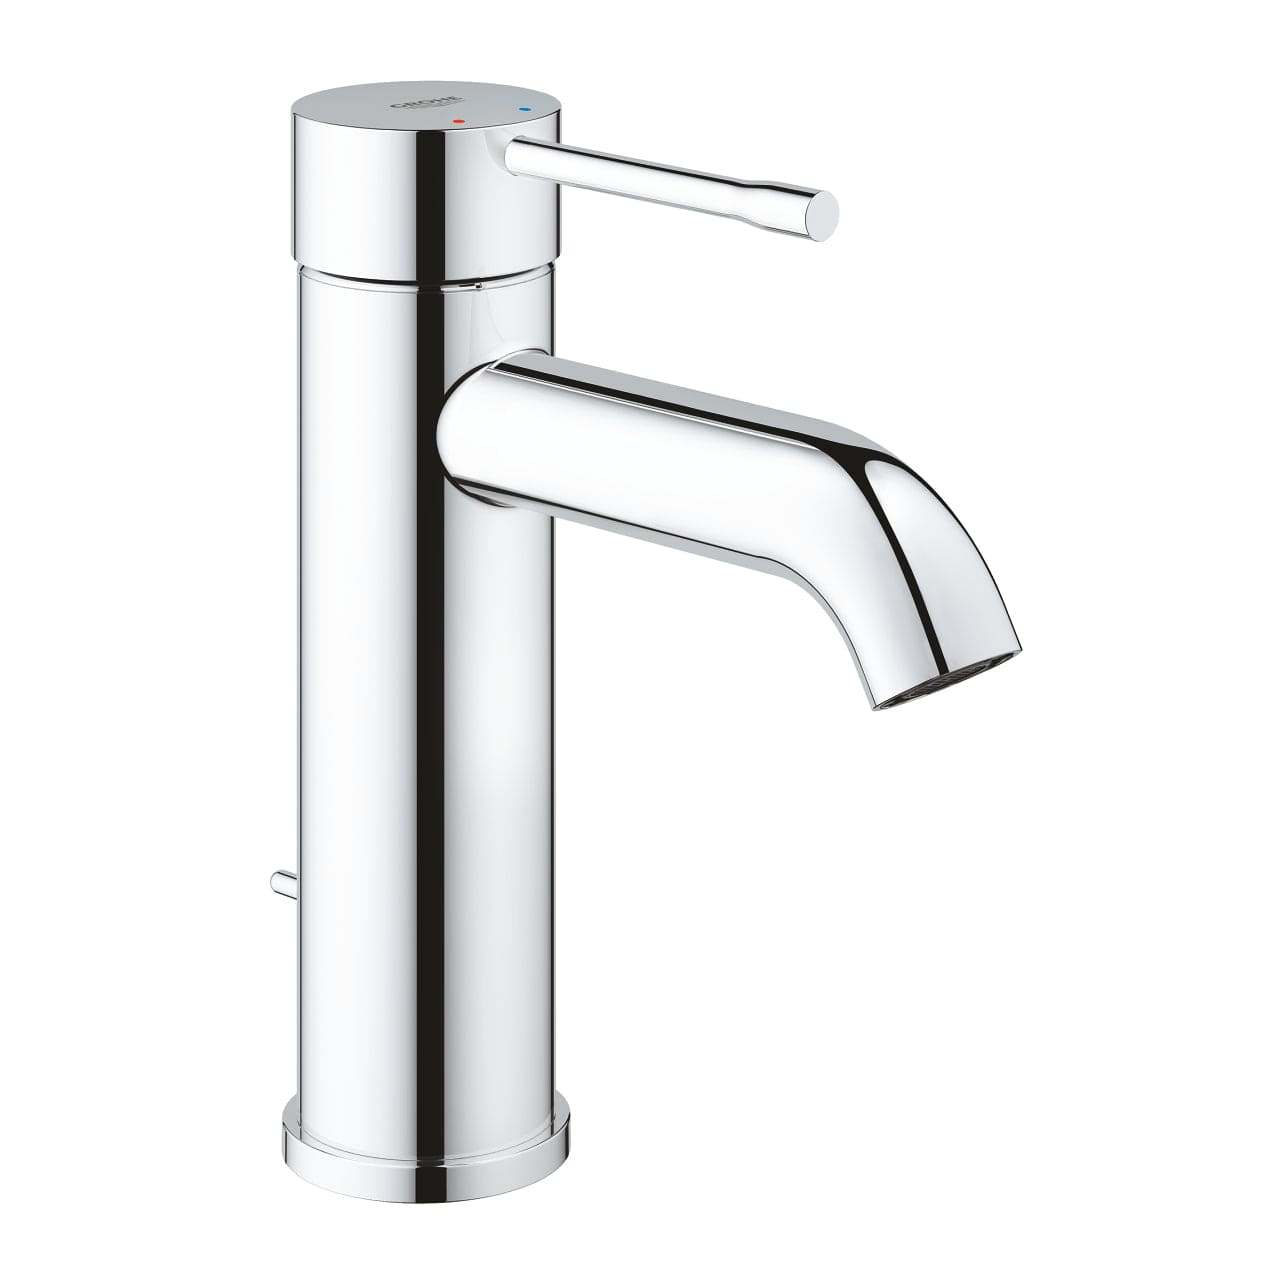 Grohe Essence Basin Mixer 1/2″ S-Size, Chrome | Supply Master | Accra, Ghana Bathroom Faucet Buy Tools hardware Building materials